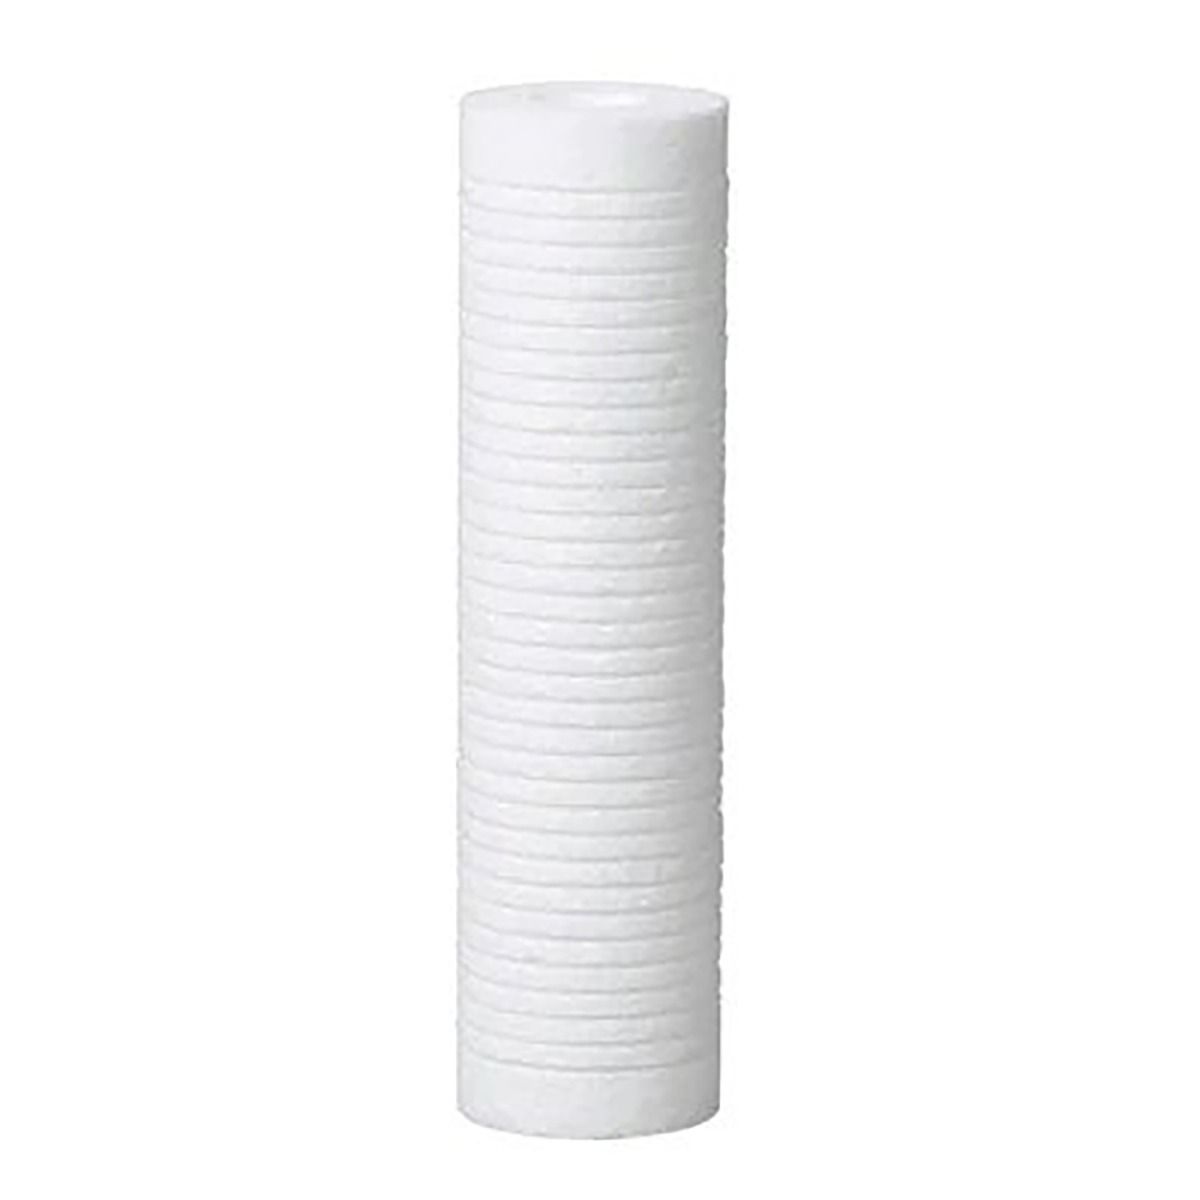 3M Aqua-Pure Whole House Replacement Filters